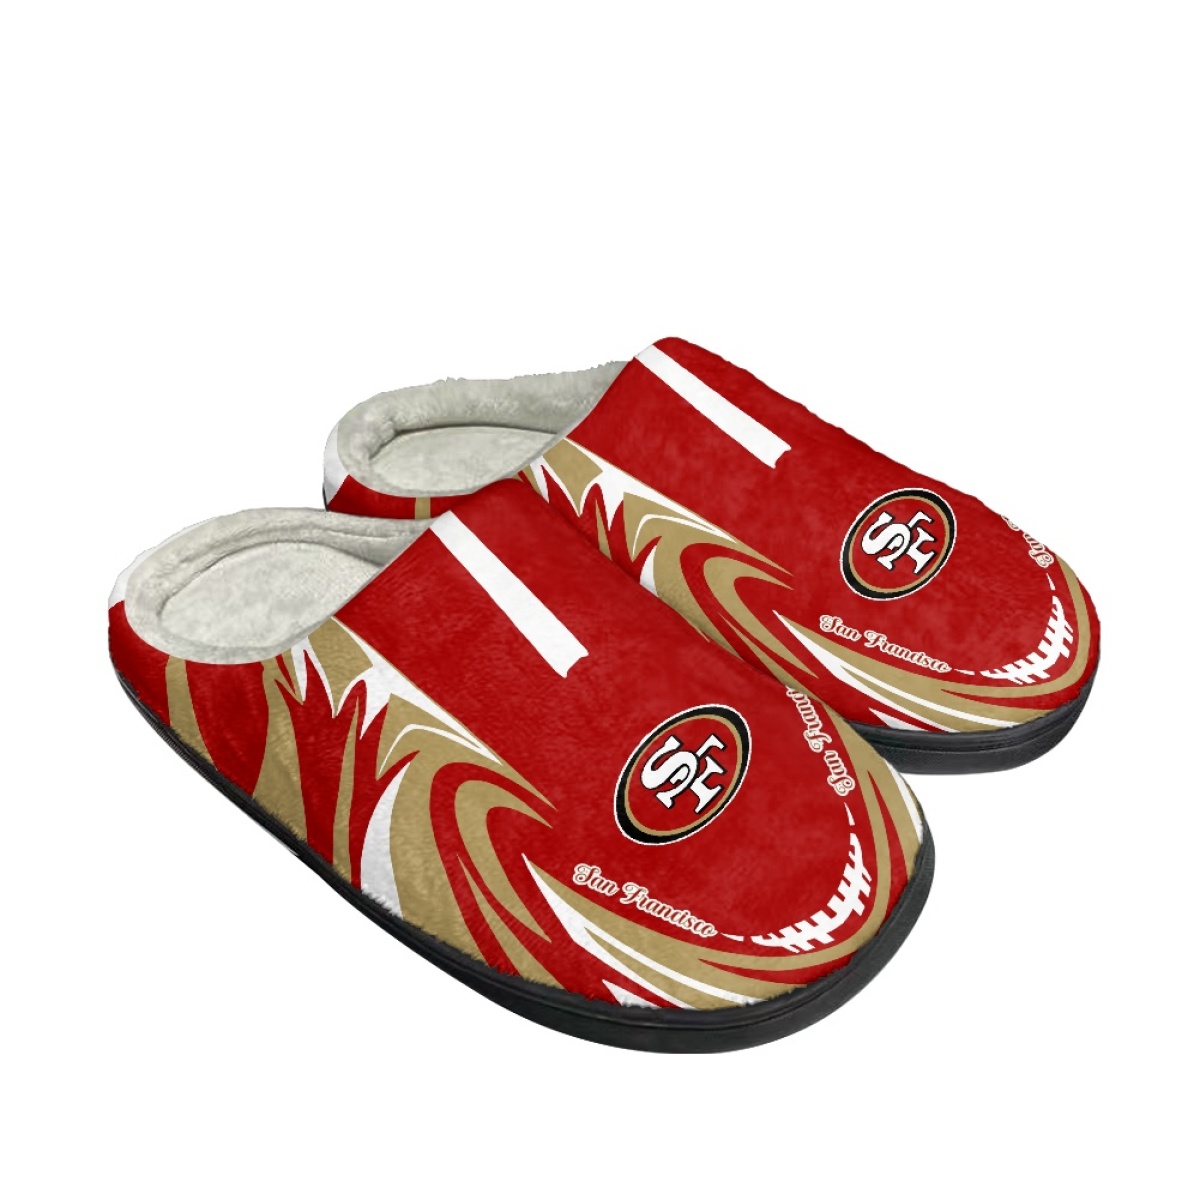 Women's San Francisco 49ers Slippers/Shoes 004